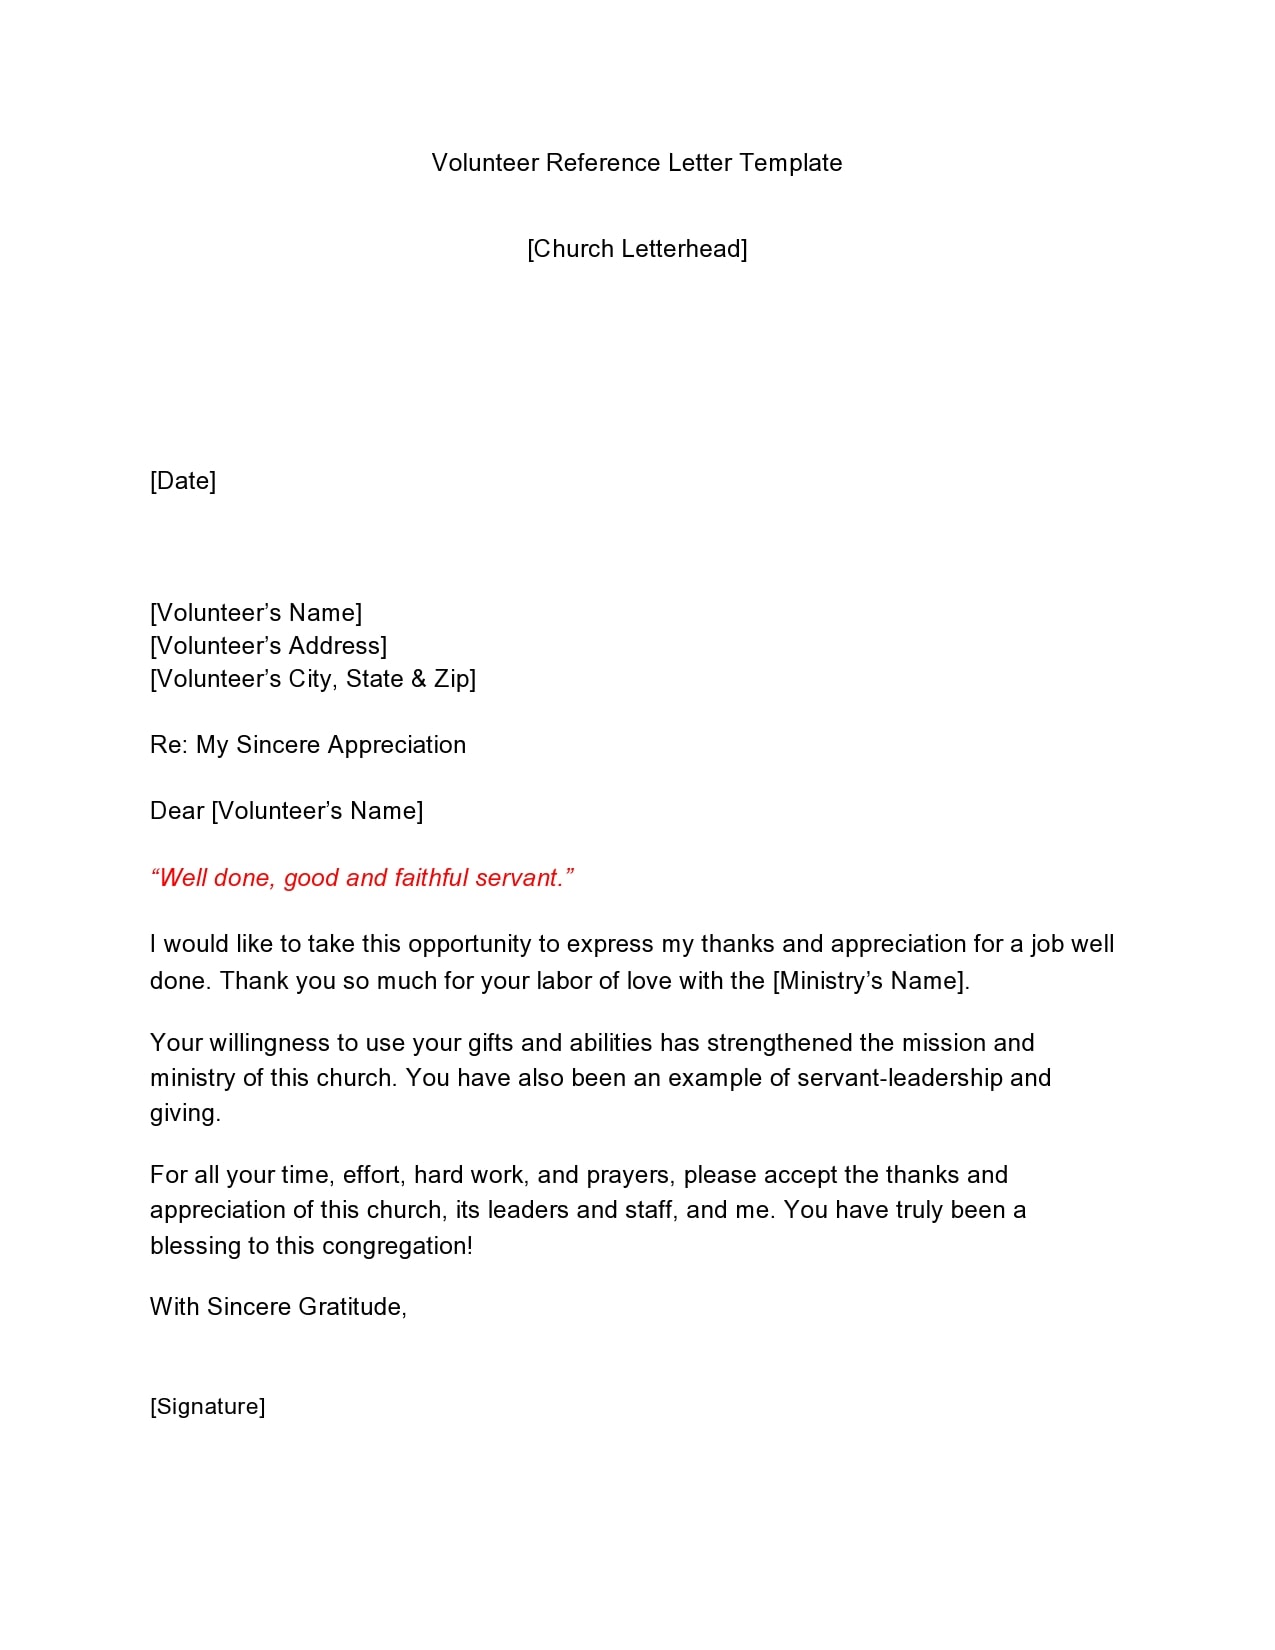 21 Professional Volunteer Recommendation Letters [Free] Intended For Reference Letter Template For Volunteer